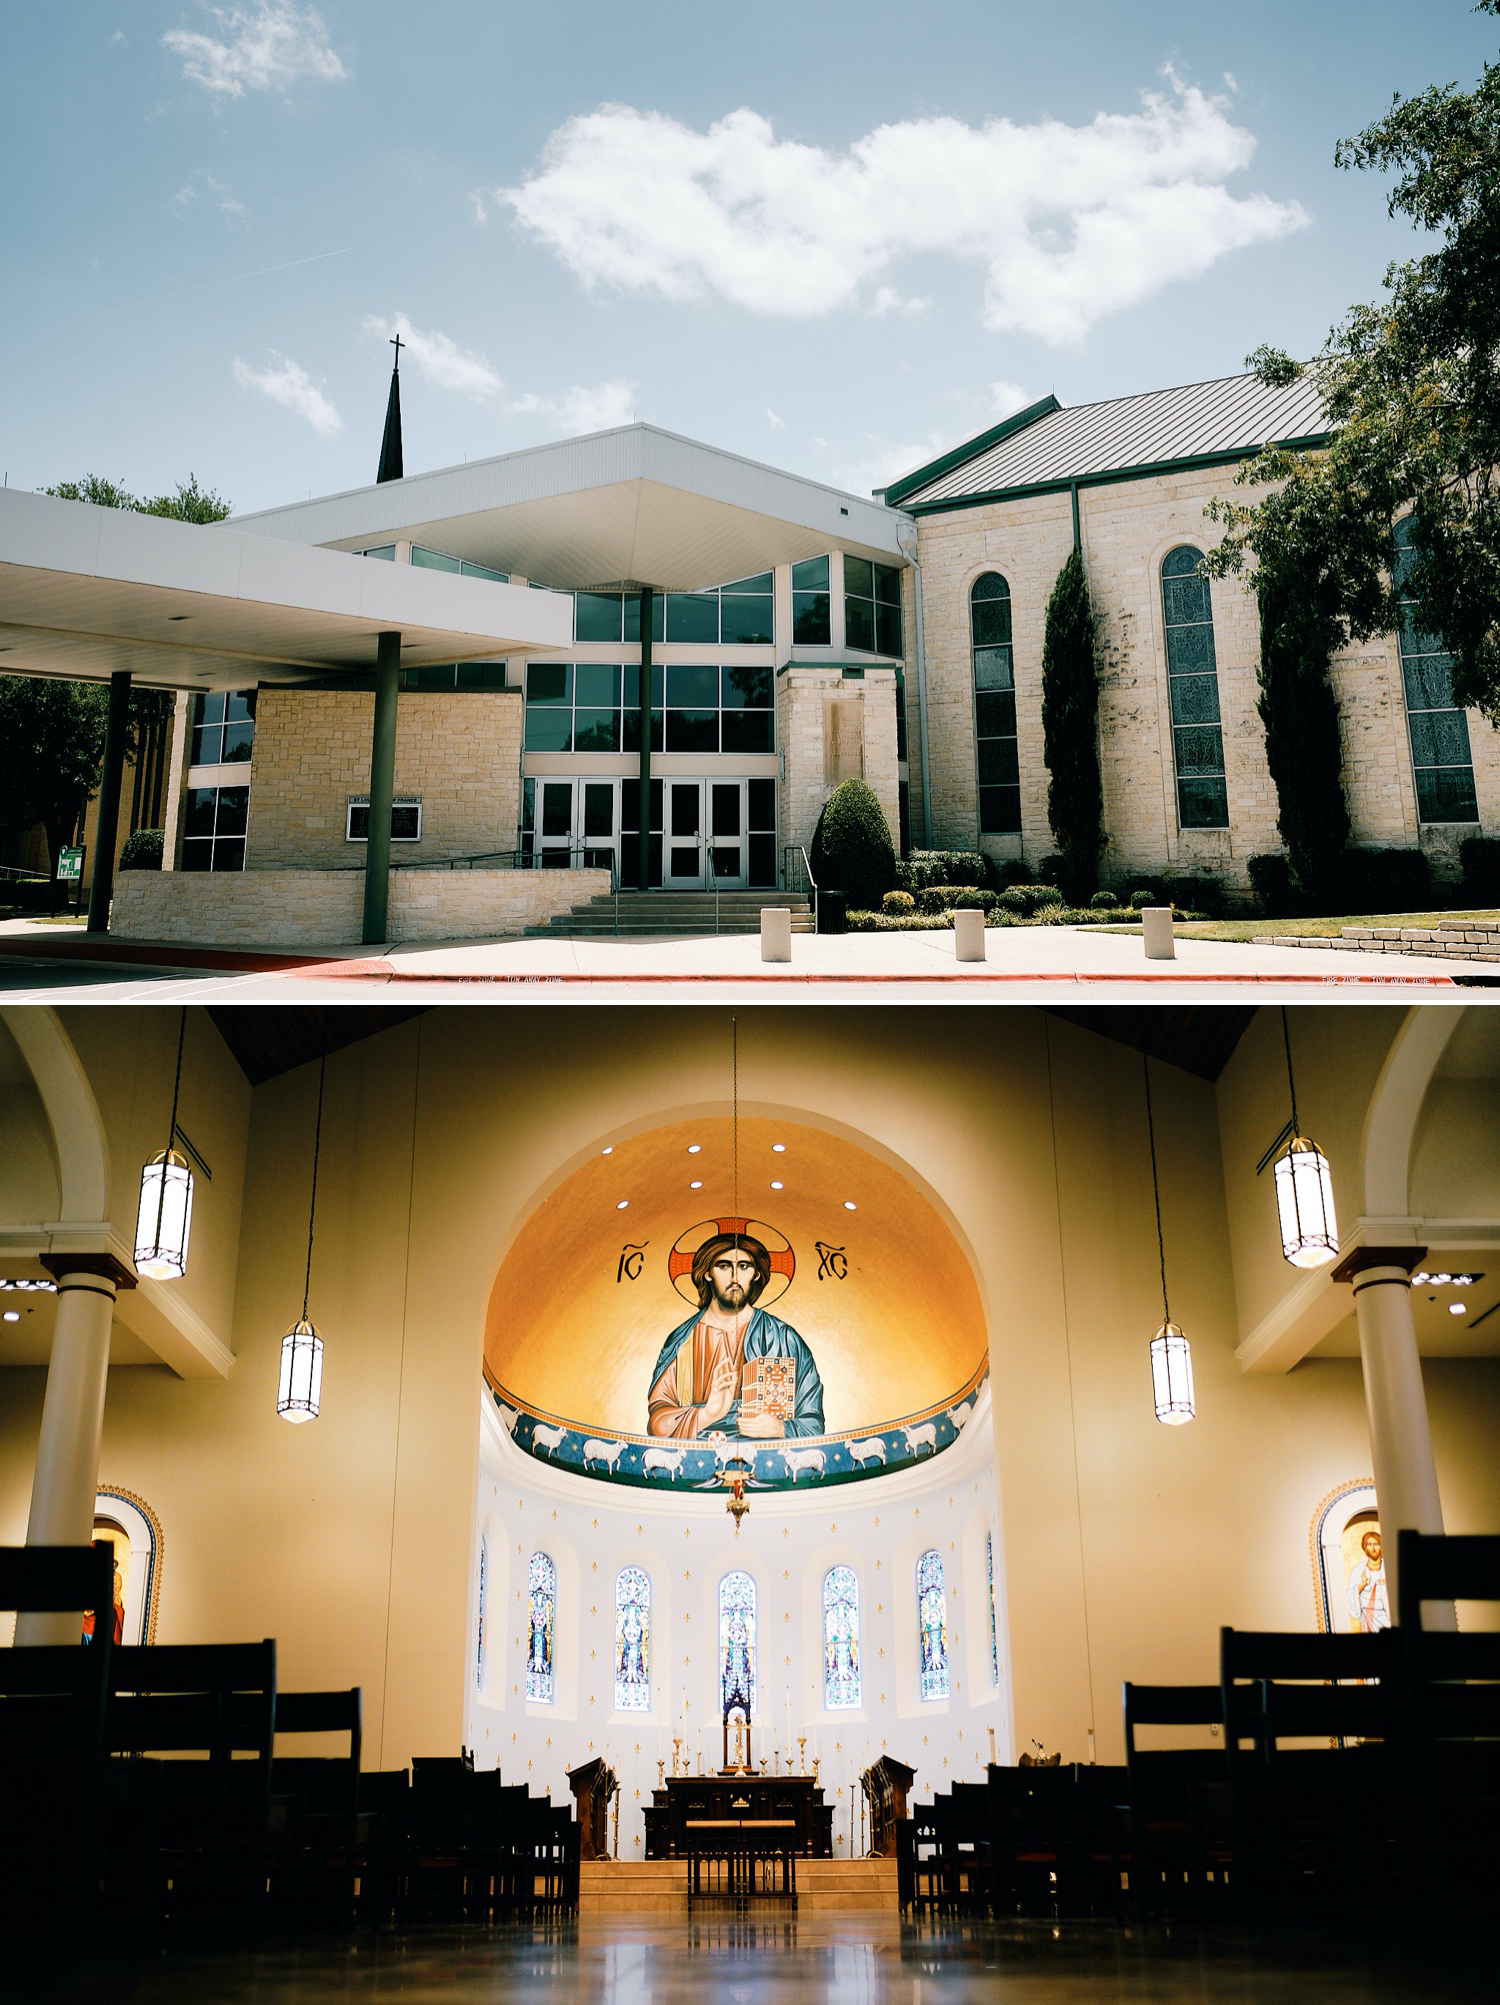 St. Louis King of France Catholic Church in Austin, Texas, where they got married. Photographed by Austin wedding photographers Mercedes Morgan Photography